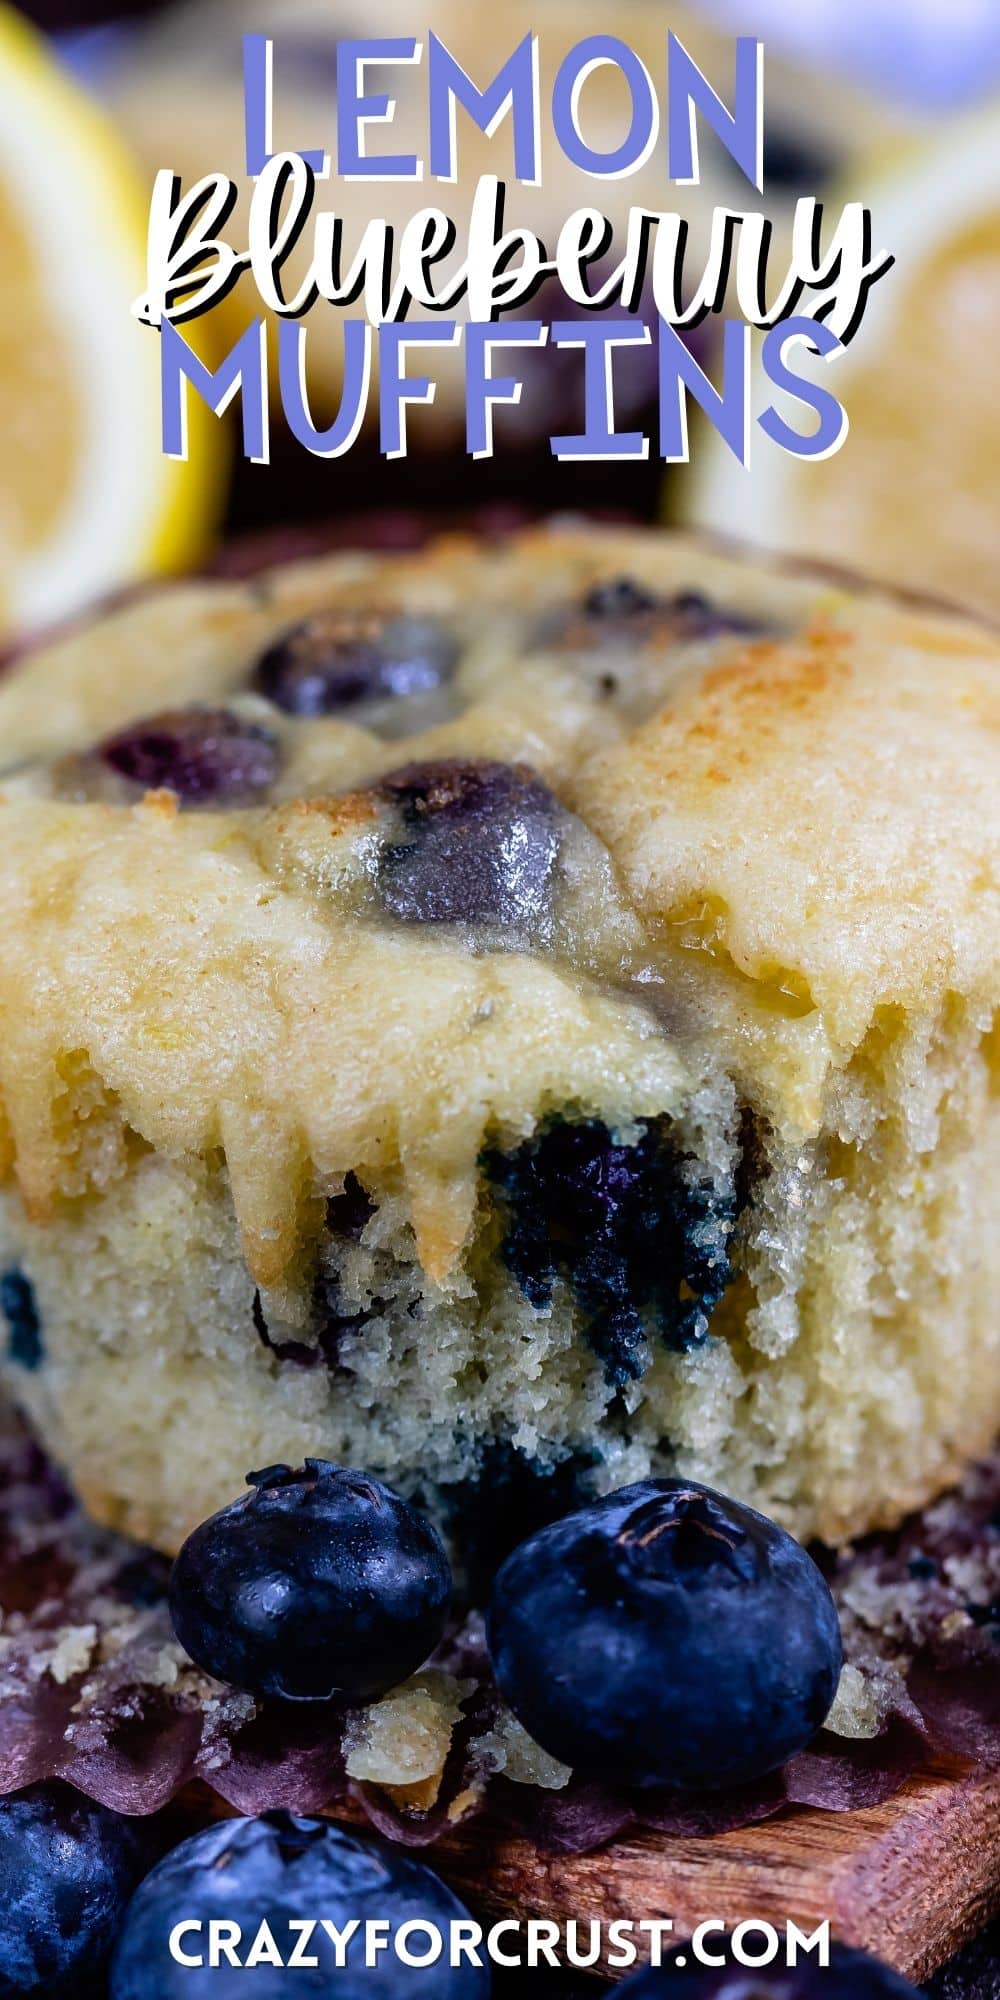 muffins with blueberries baked in with words in the image.